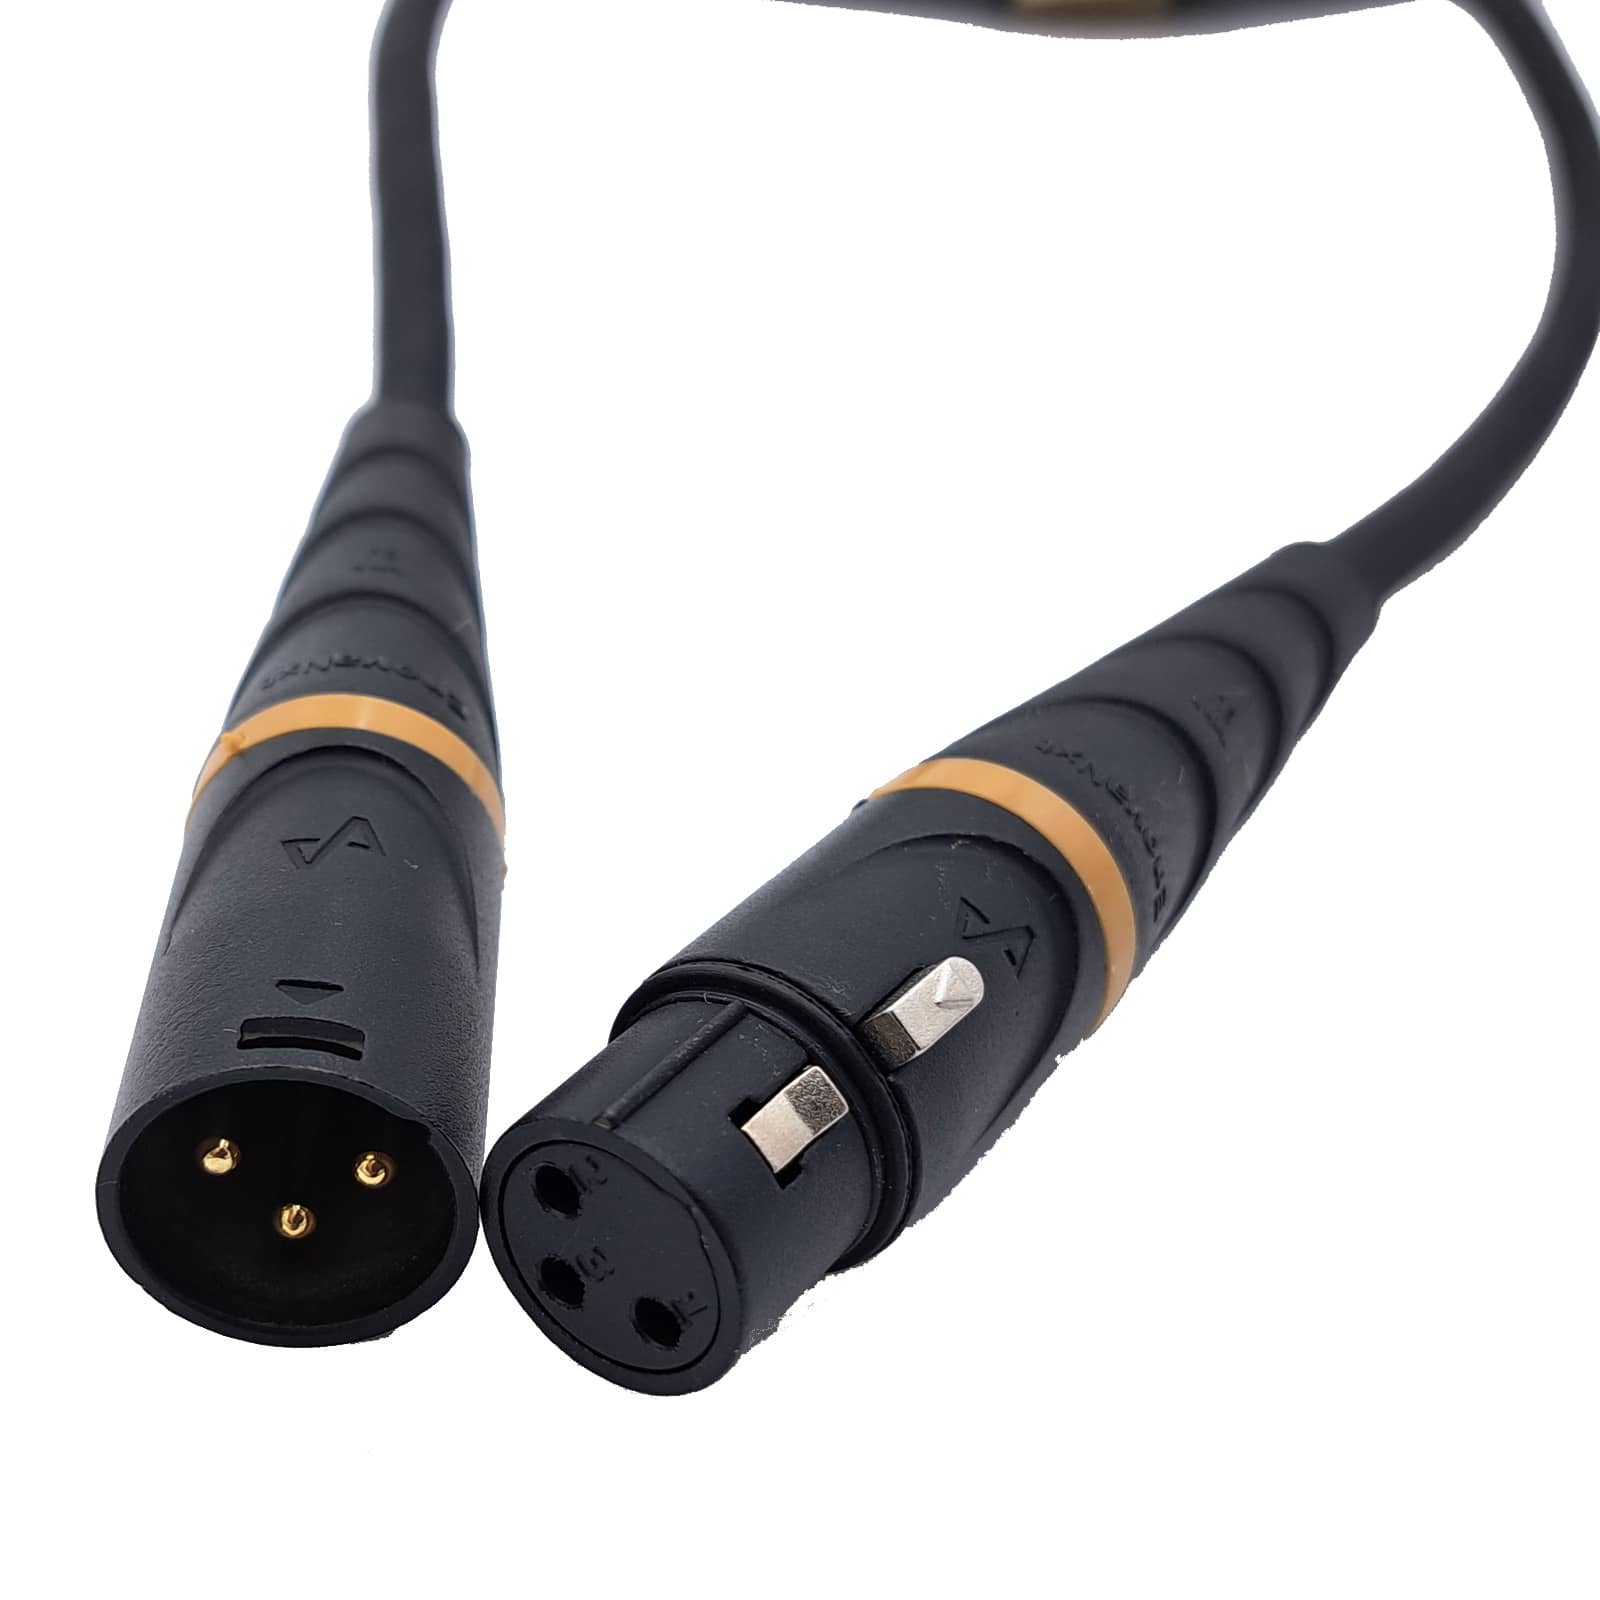 Aya 10ft (10 Feet) XLR 3-Pin male to Female Microphone Extension Cable 22AWG